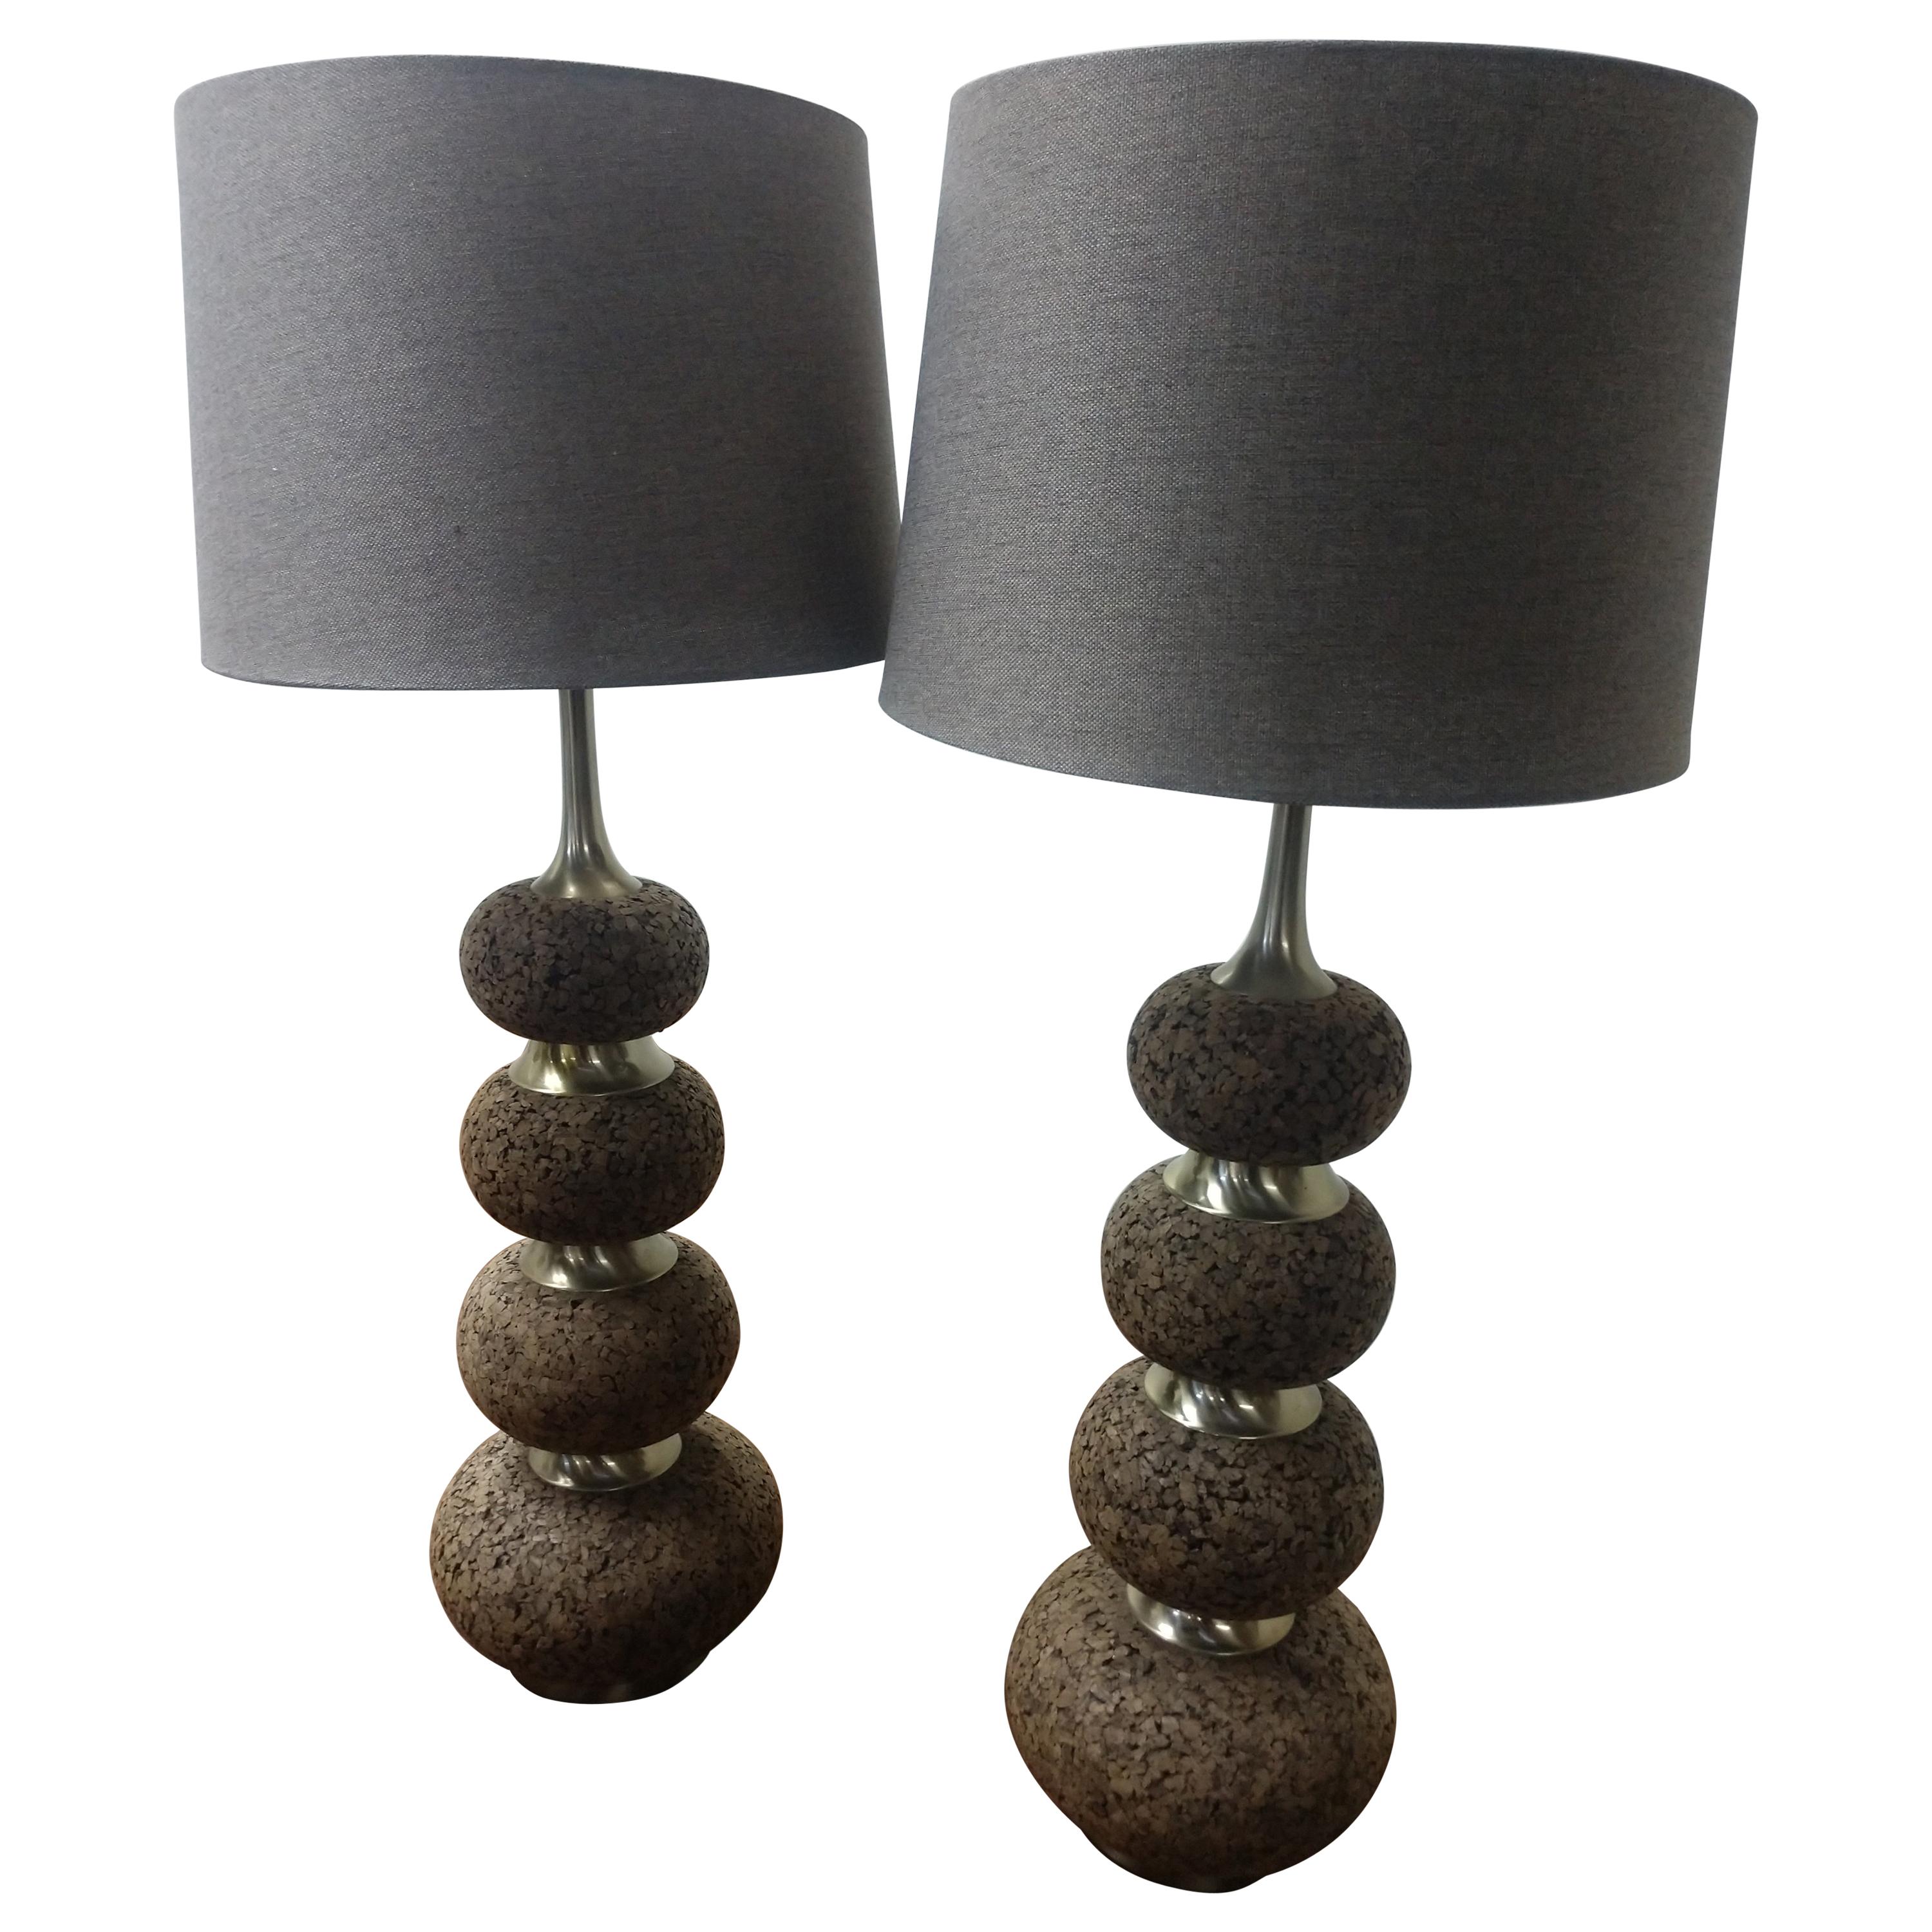 Pair of Mid-Century Modern Stacked Cork with Chrome Table Lamps